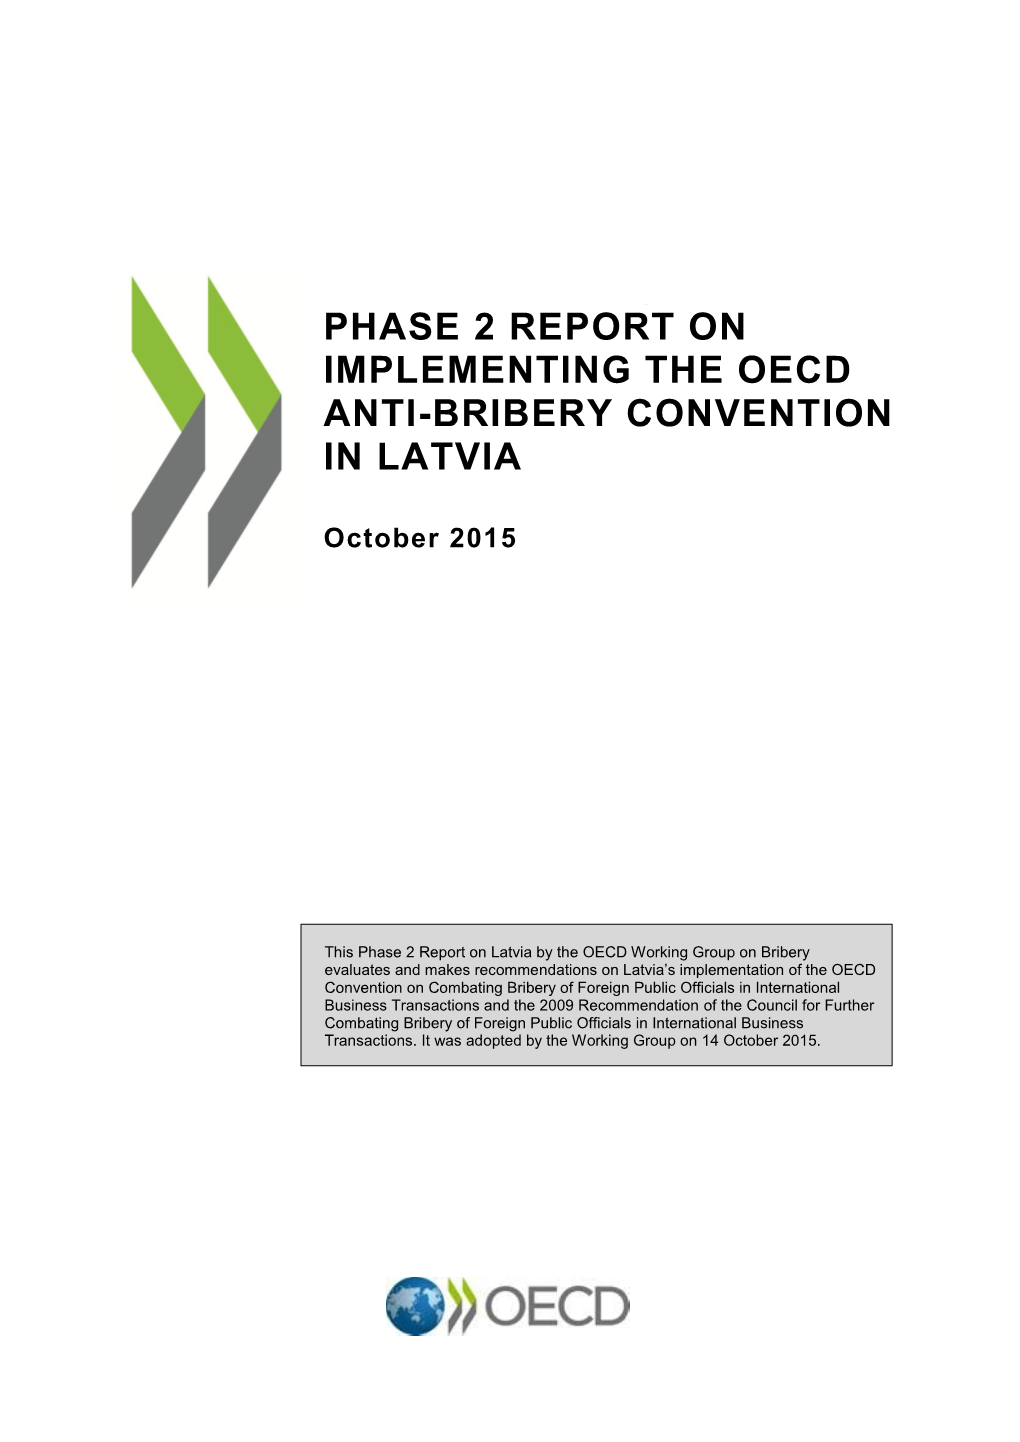 Phase 2 Report on Implementing the Oecd Anti-Bribery Convention in Latvia